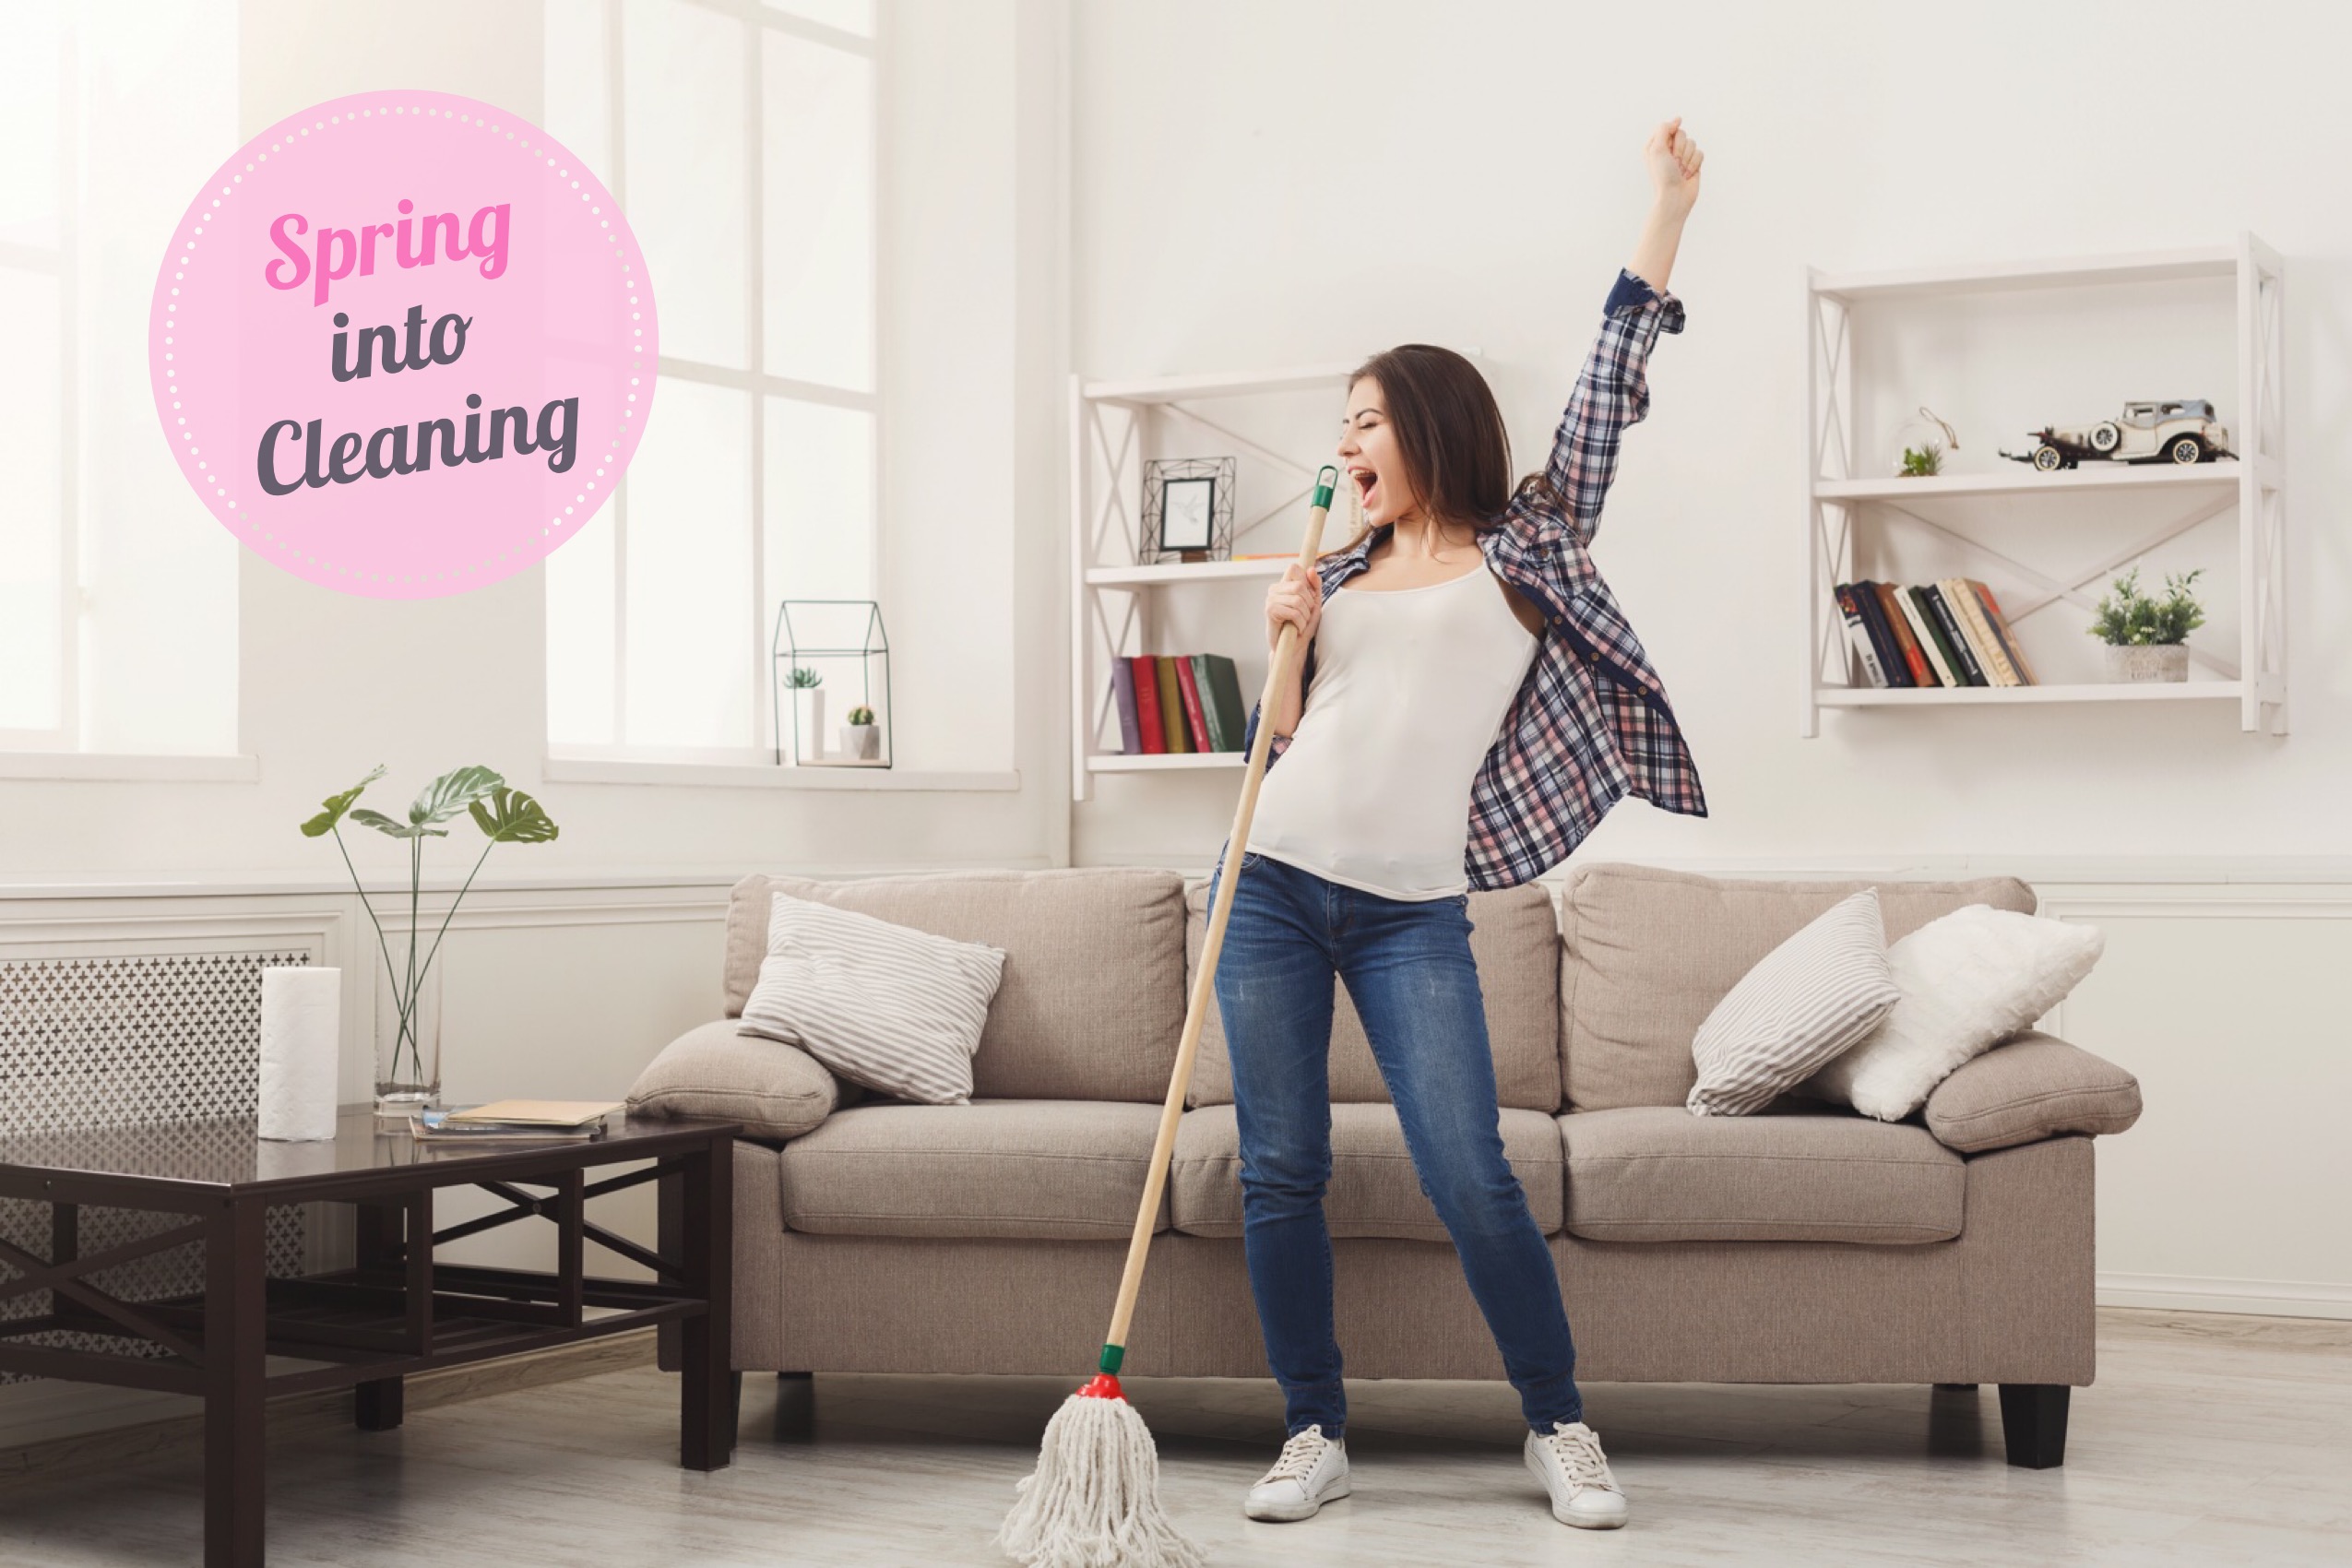 Spring into Cleaning!